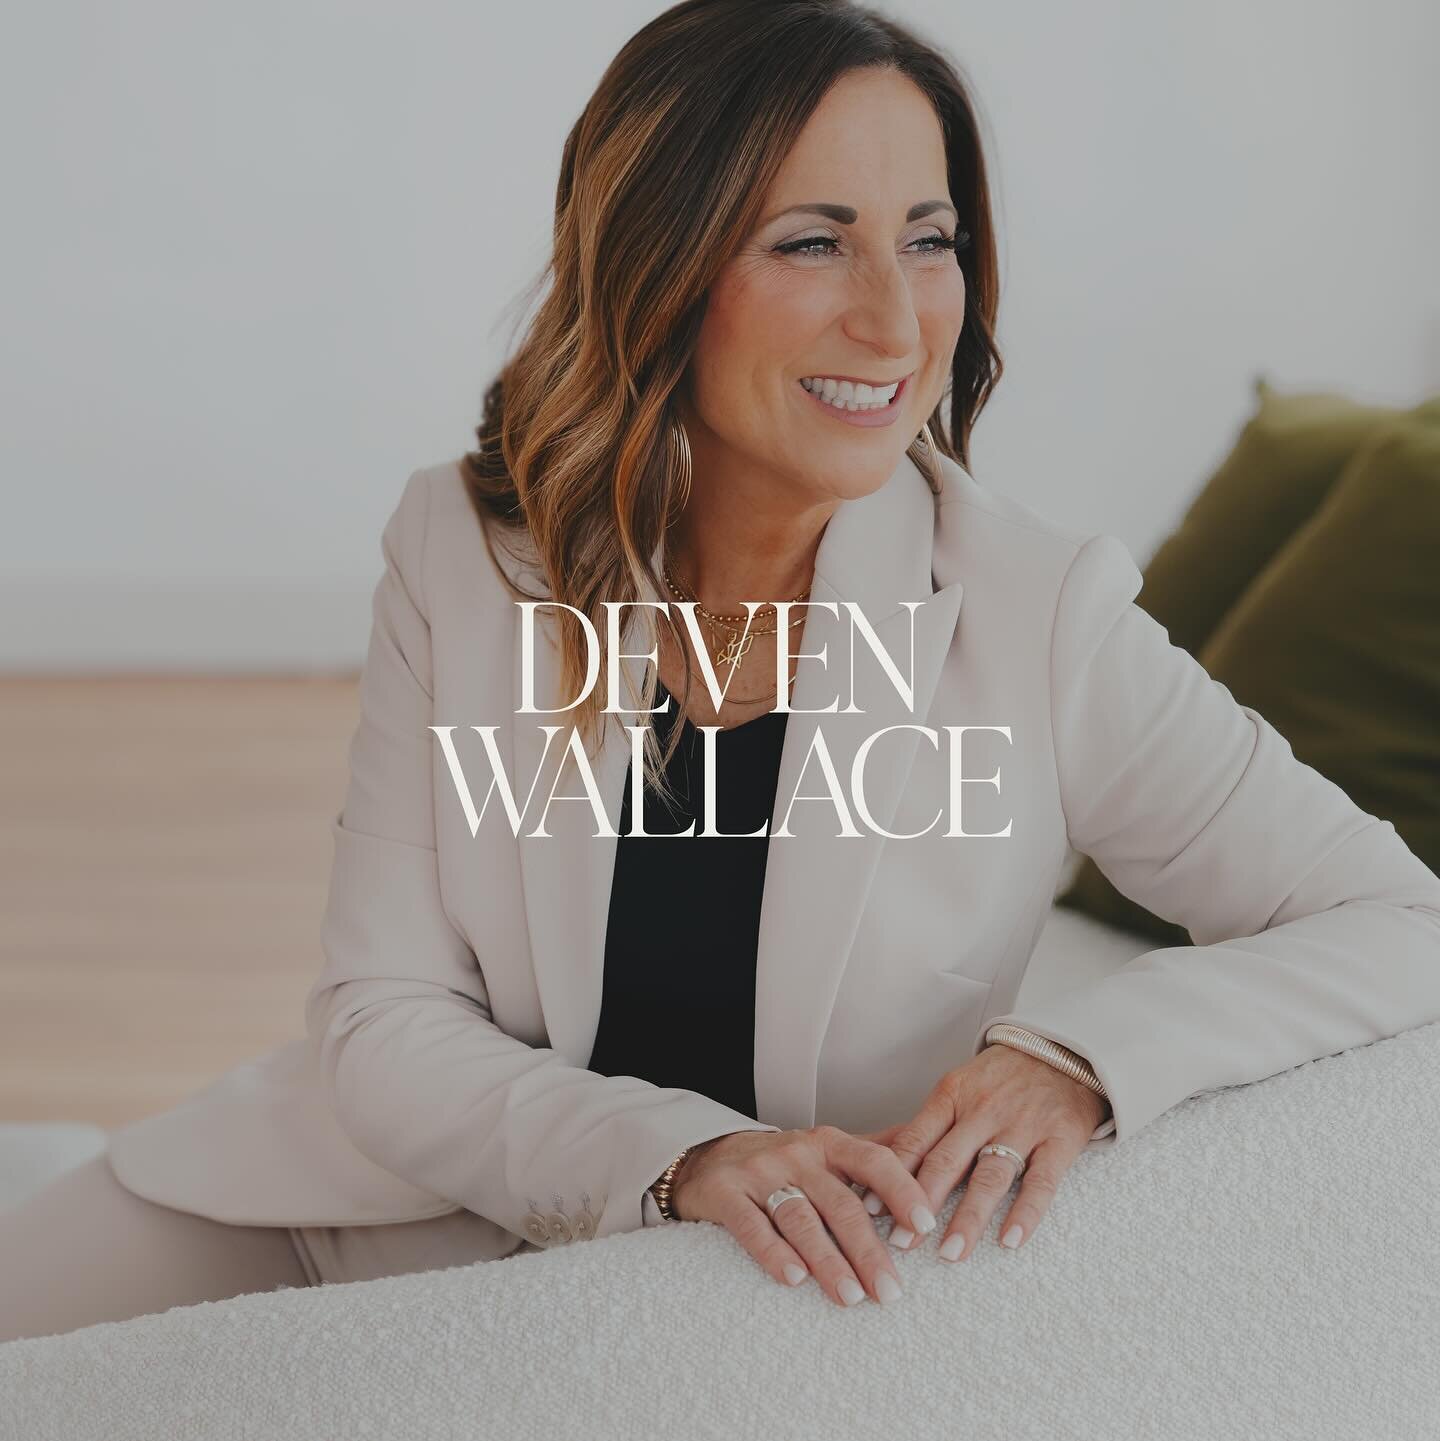 We just put the finishing touches on this amazing rebrand for @pastordeven and it&rsquo;s absolutely stunning! ✨ 

Deven wanted a brand new identity and website that would capture her heart and showcase her passions to her community. With our Brand a